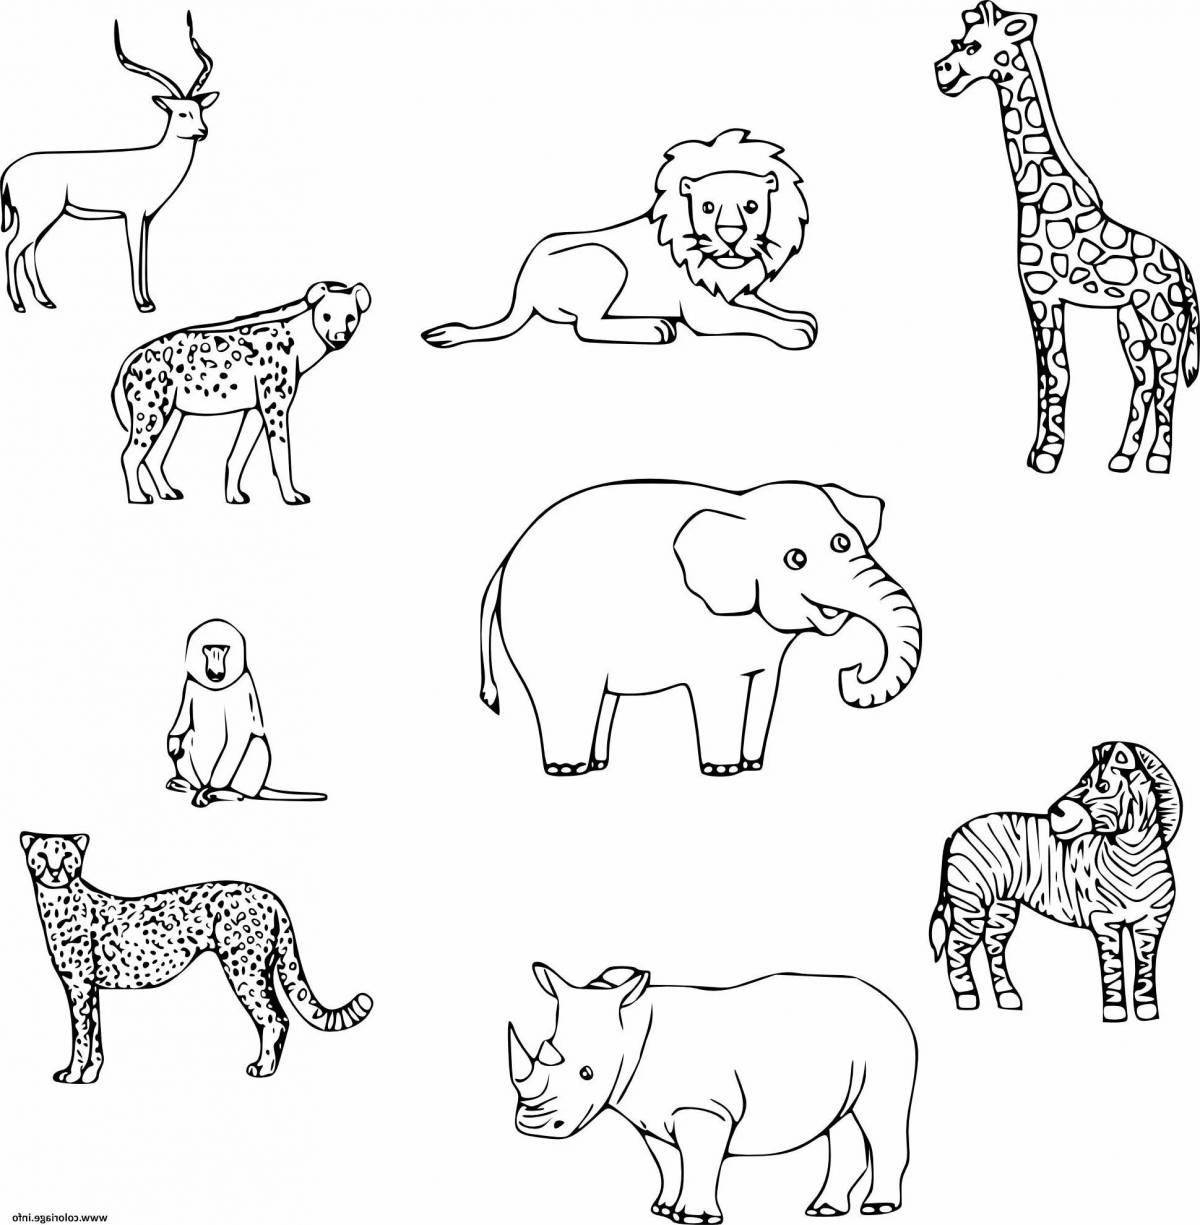 Powerful wild animals coloring page